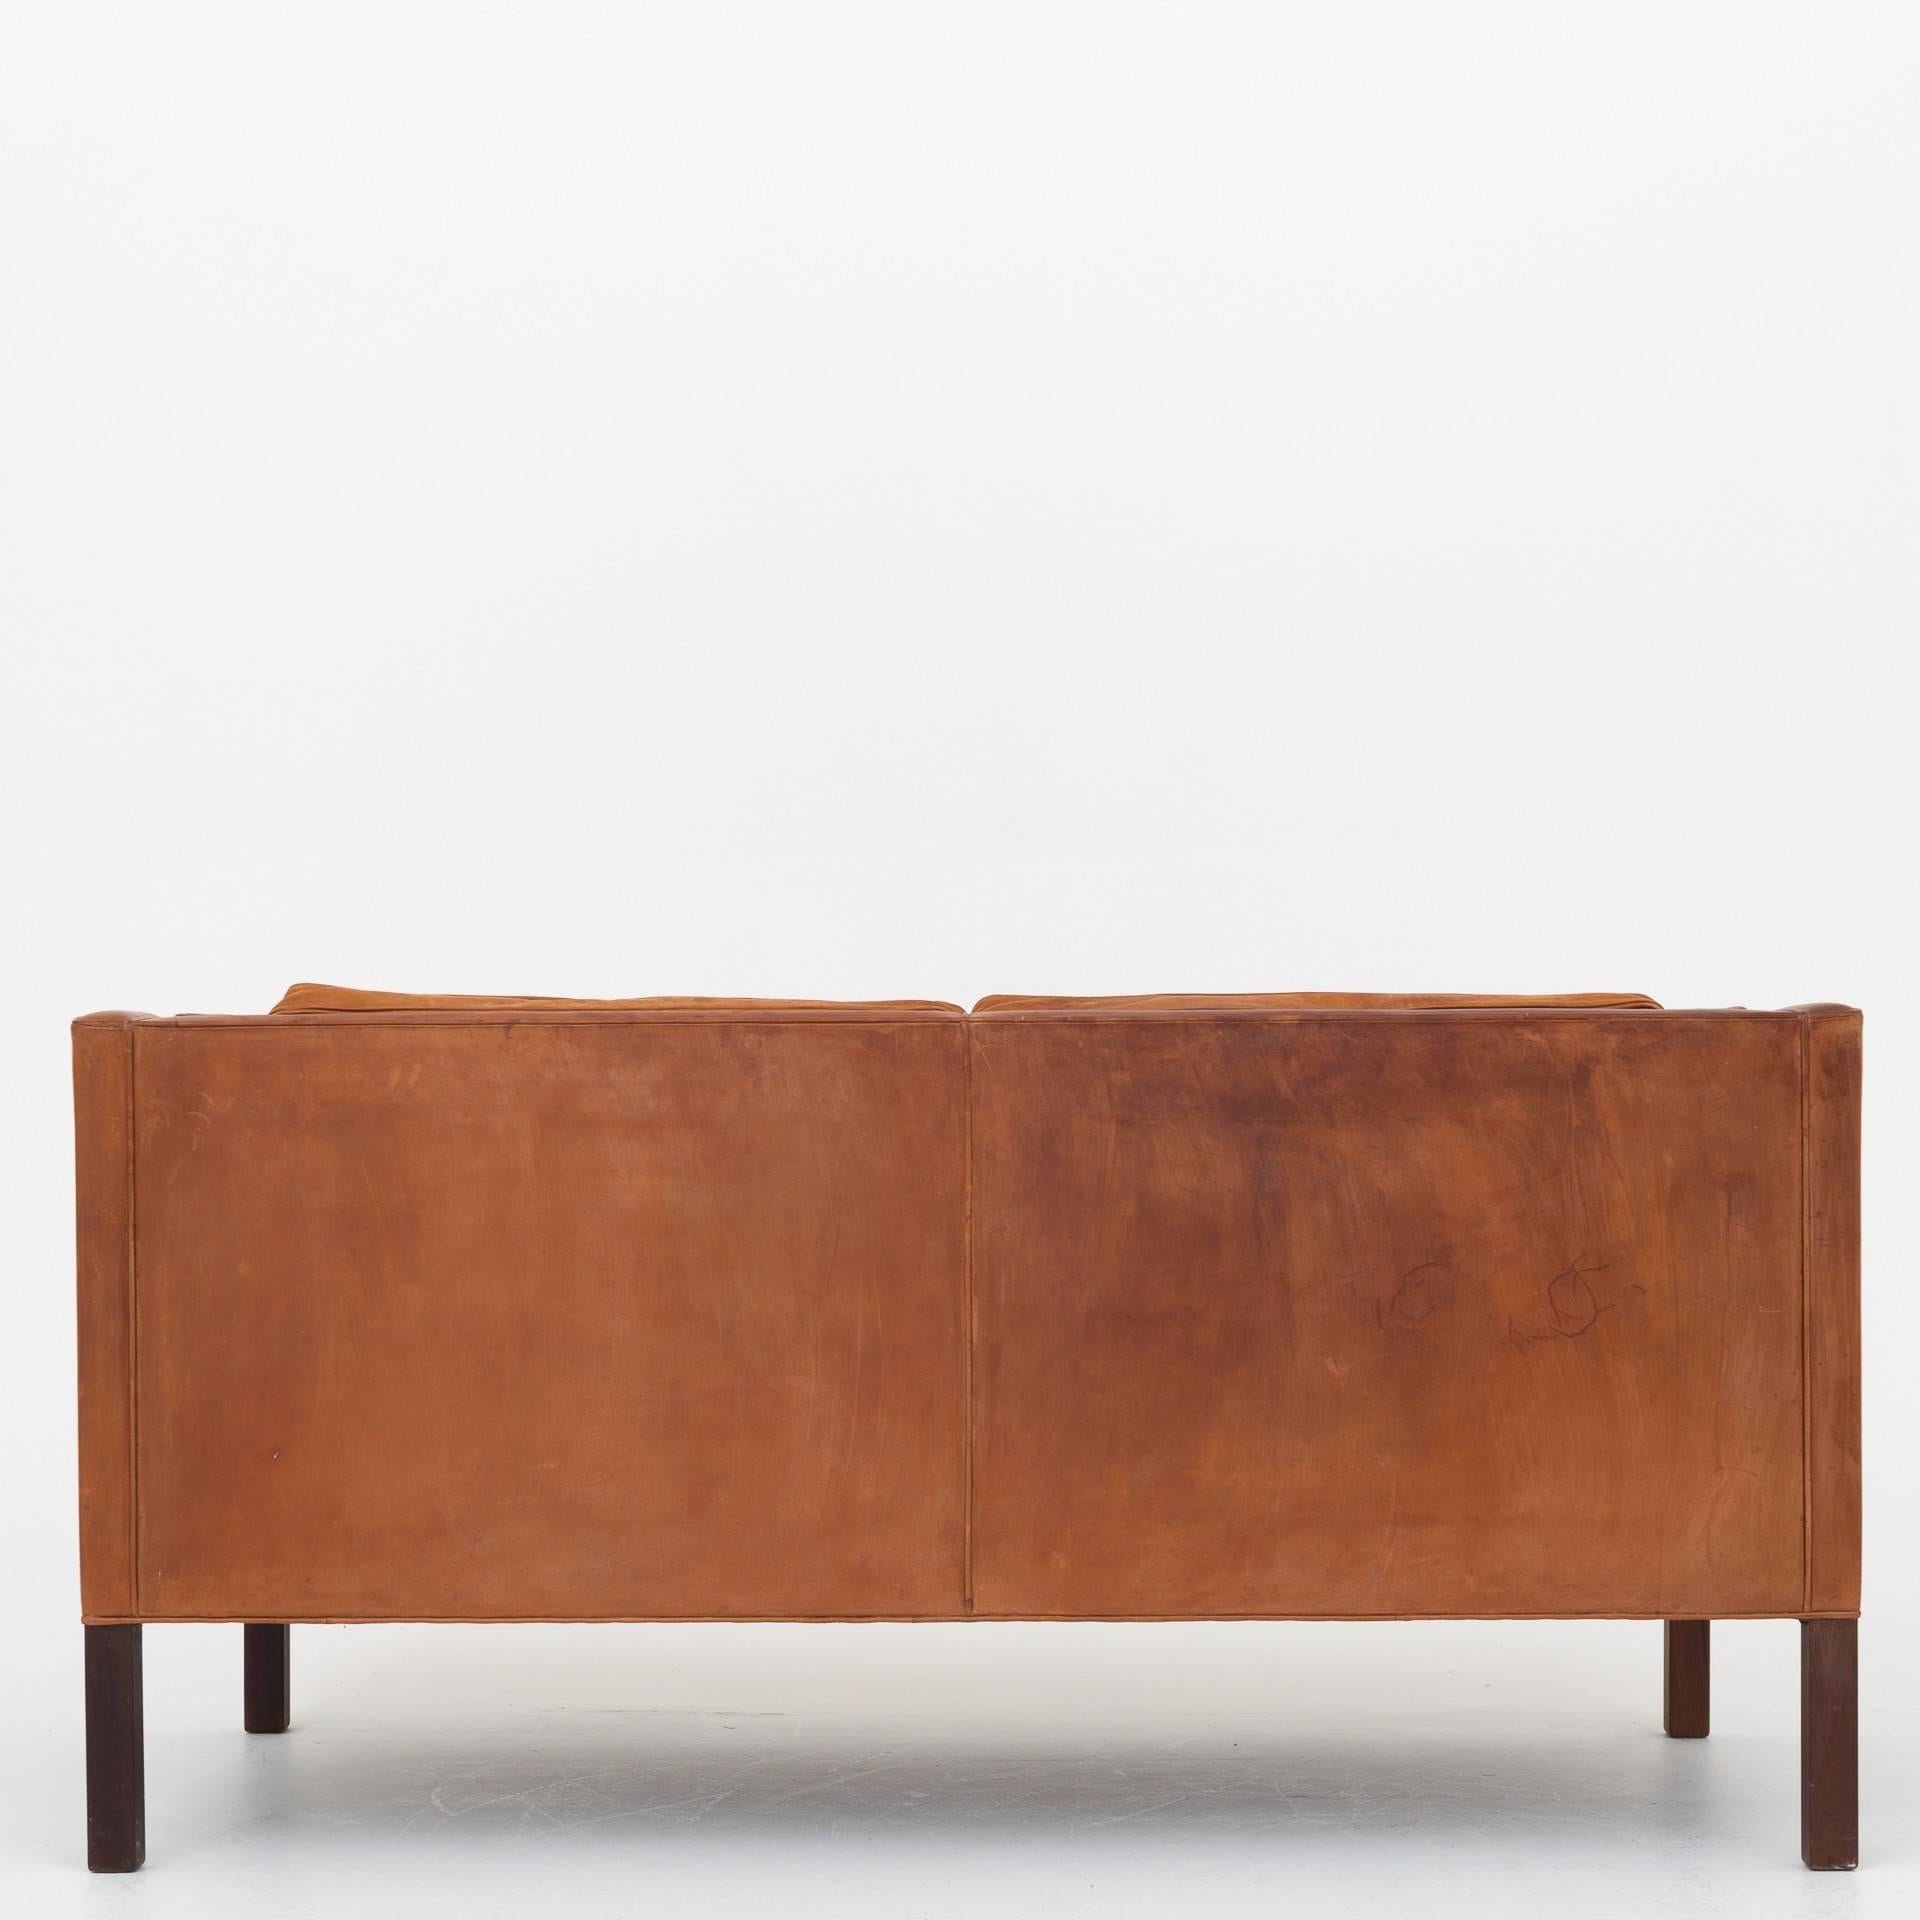 Sofa in patinated natural leather with legs in walnut. Maker Fredercia Furniture.